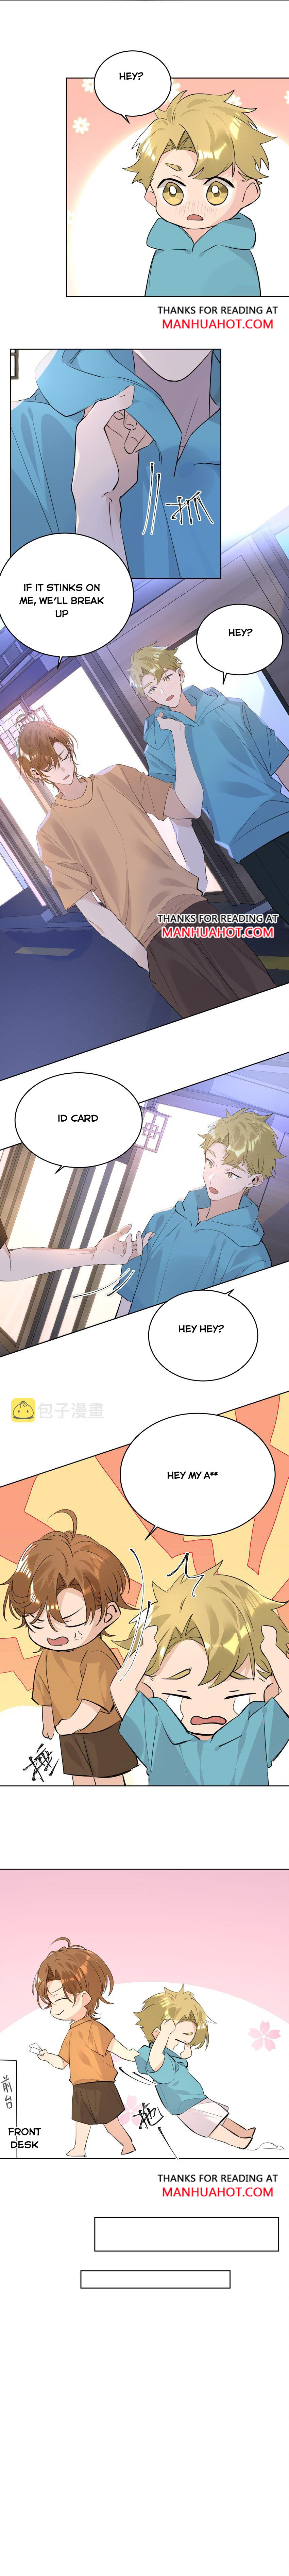 Did The Nerd Manage To Flirt With The Cutie Today? Chapter 63 #3